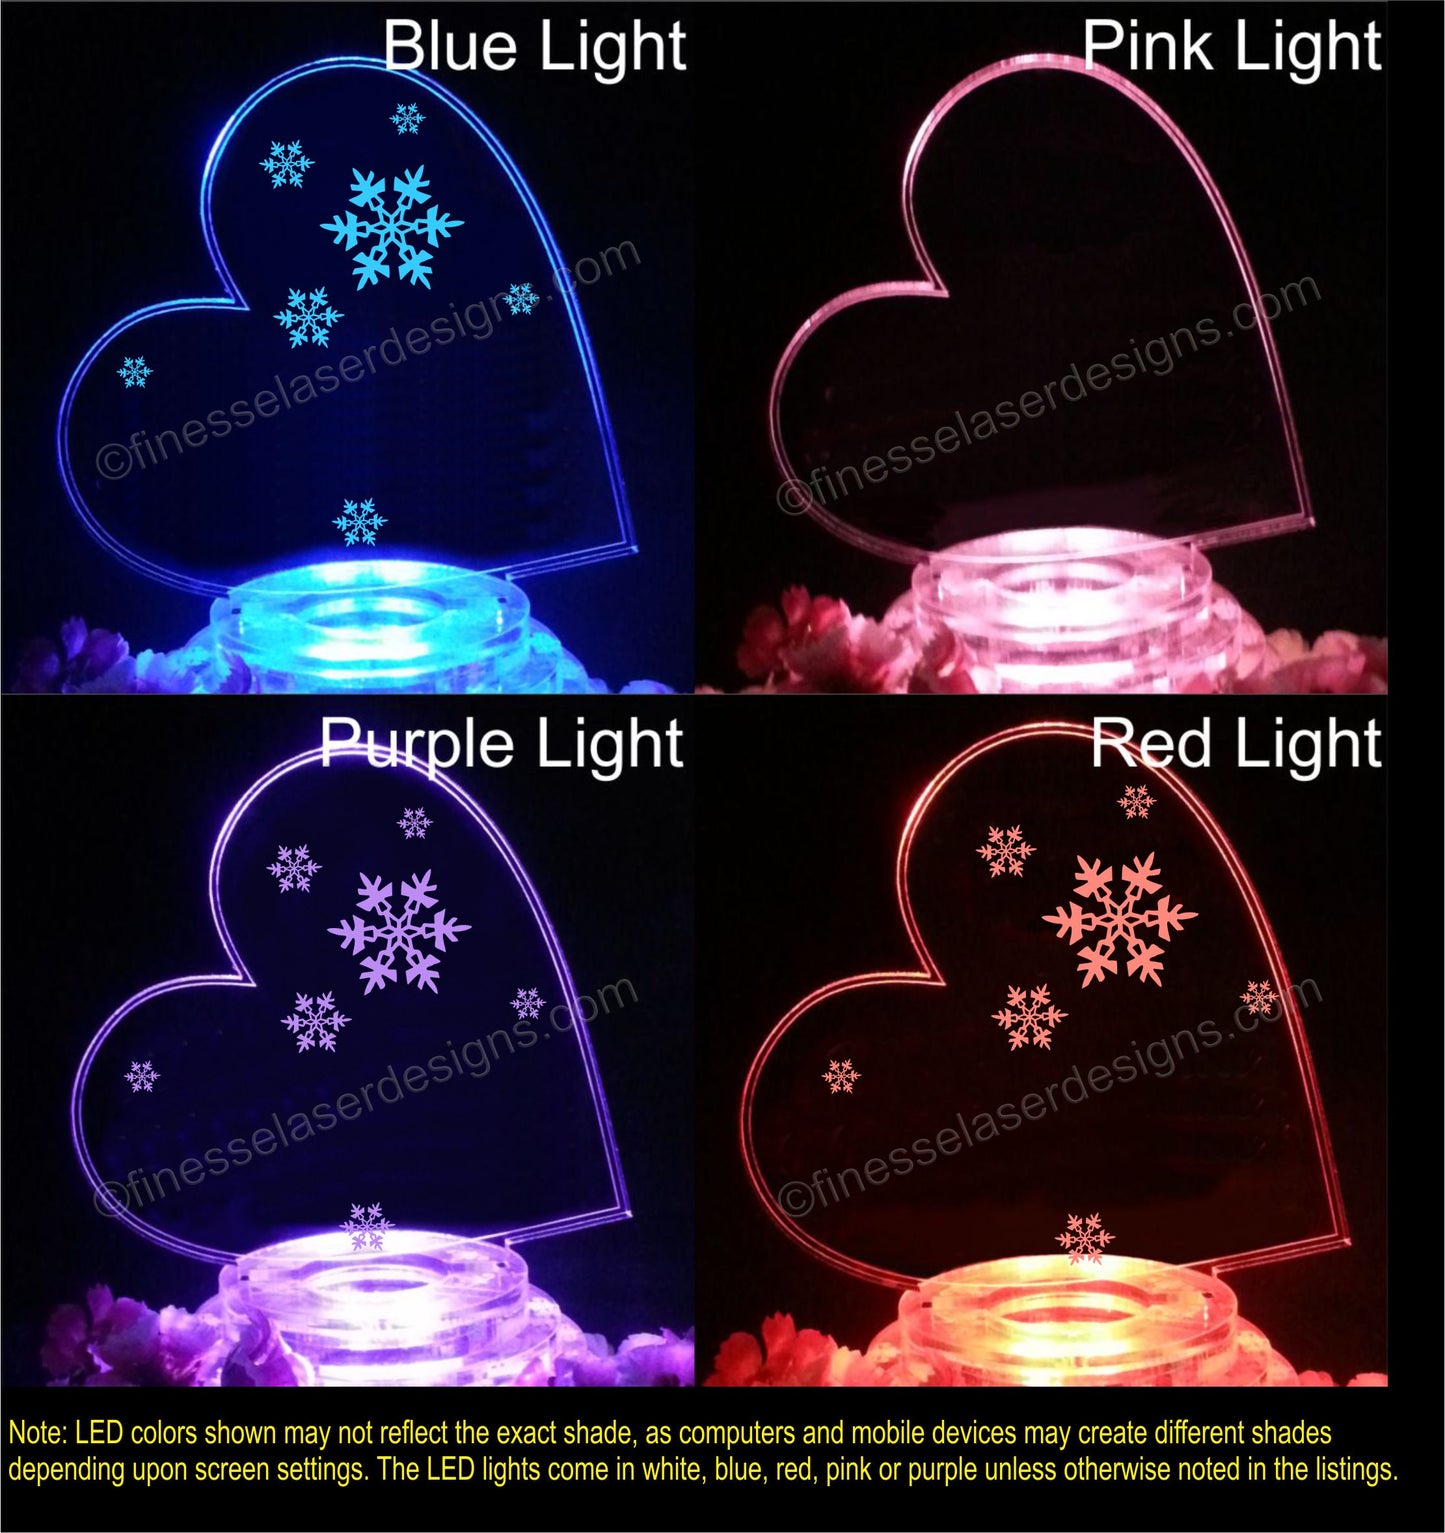 4 colored lighting views of a heart shaped cake topper designed with snowflakess, shown in blue, pink, purple and red lighting